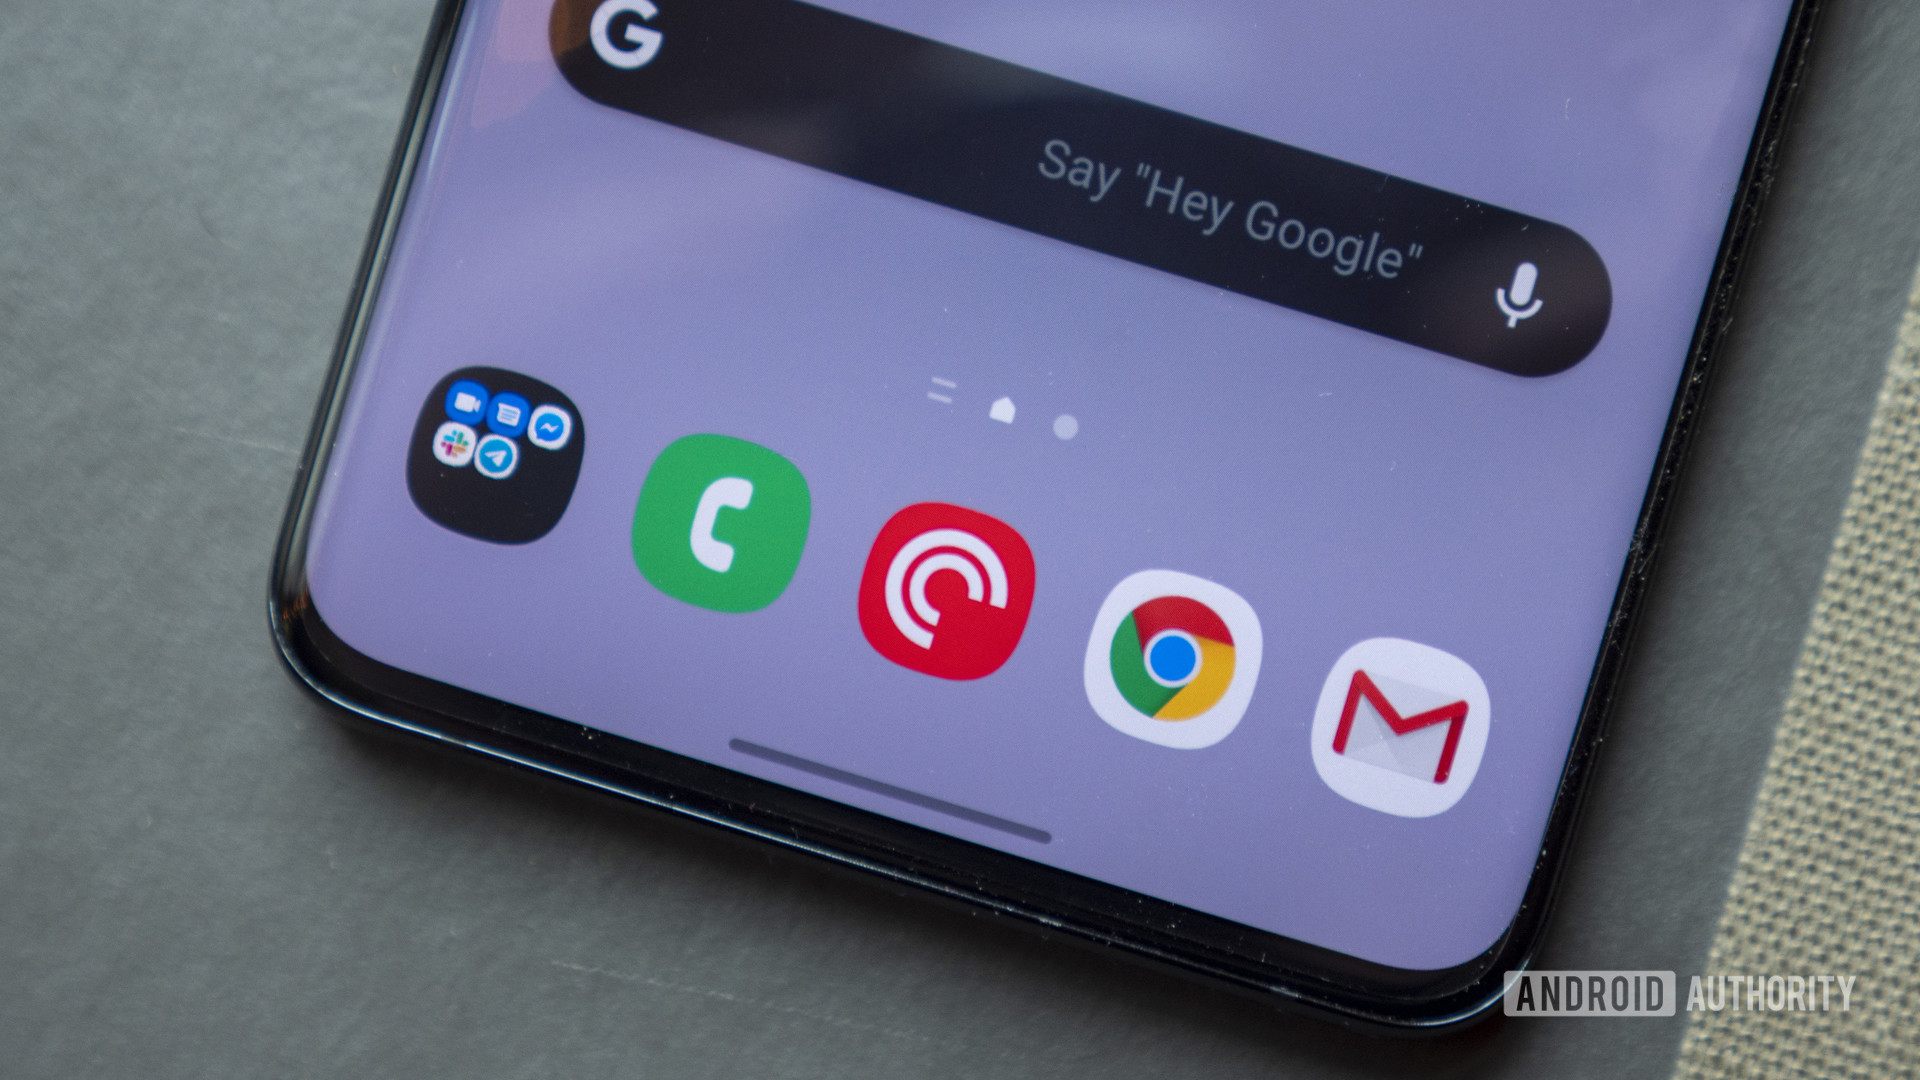 Galaxy S21 could finally ditch the Bixby homescreen in favor of Google